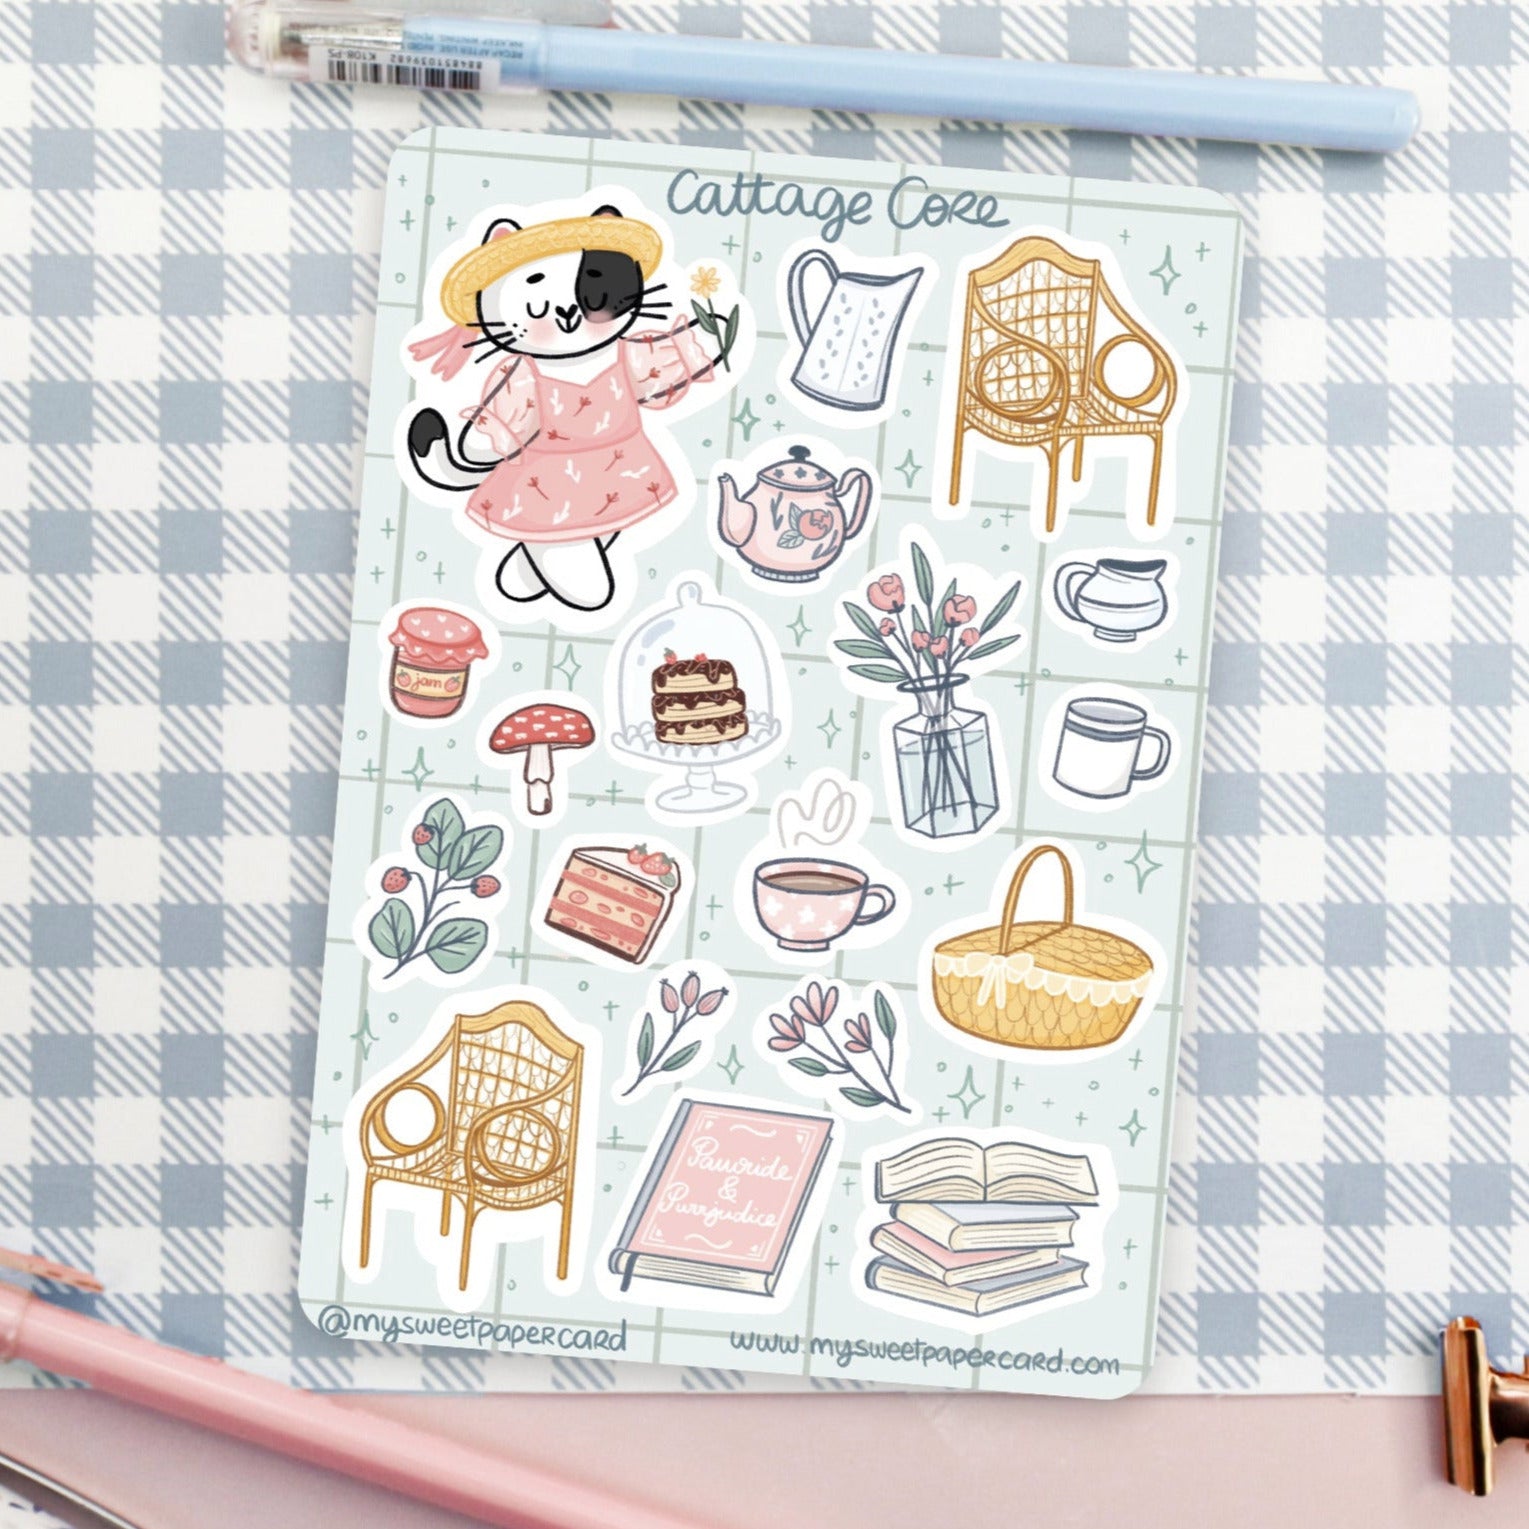 My Favorite Bullet Journal Stickers (& Where To Buy Them)